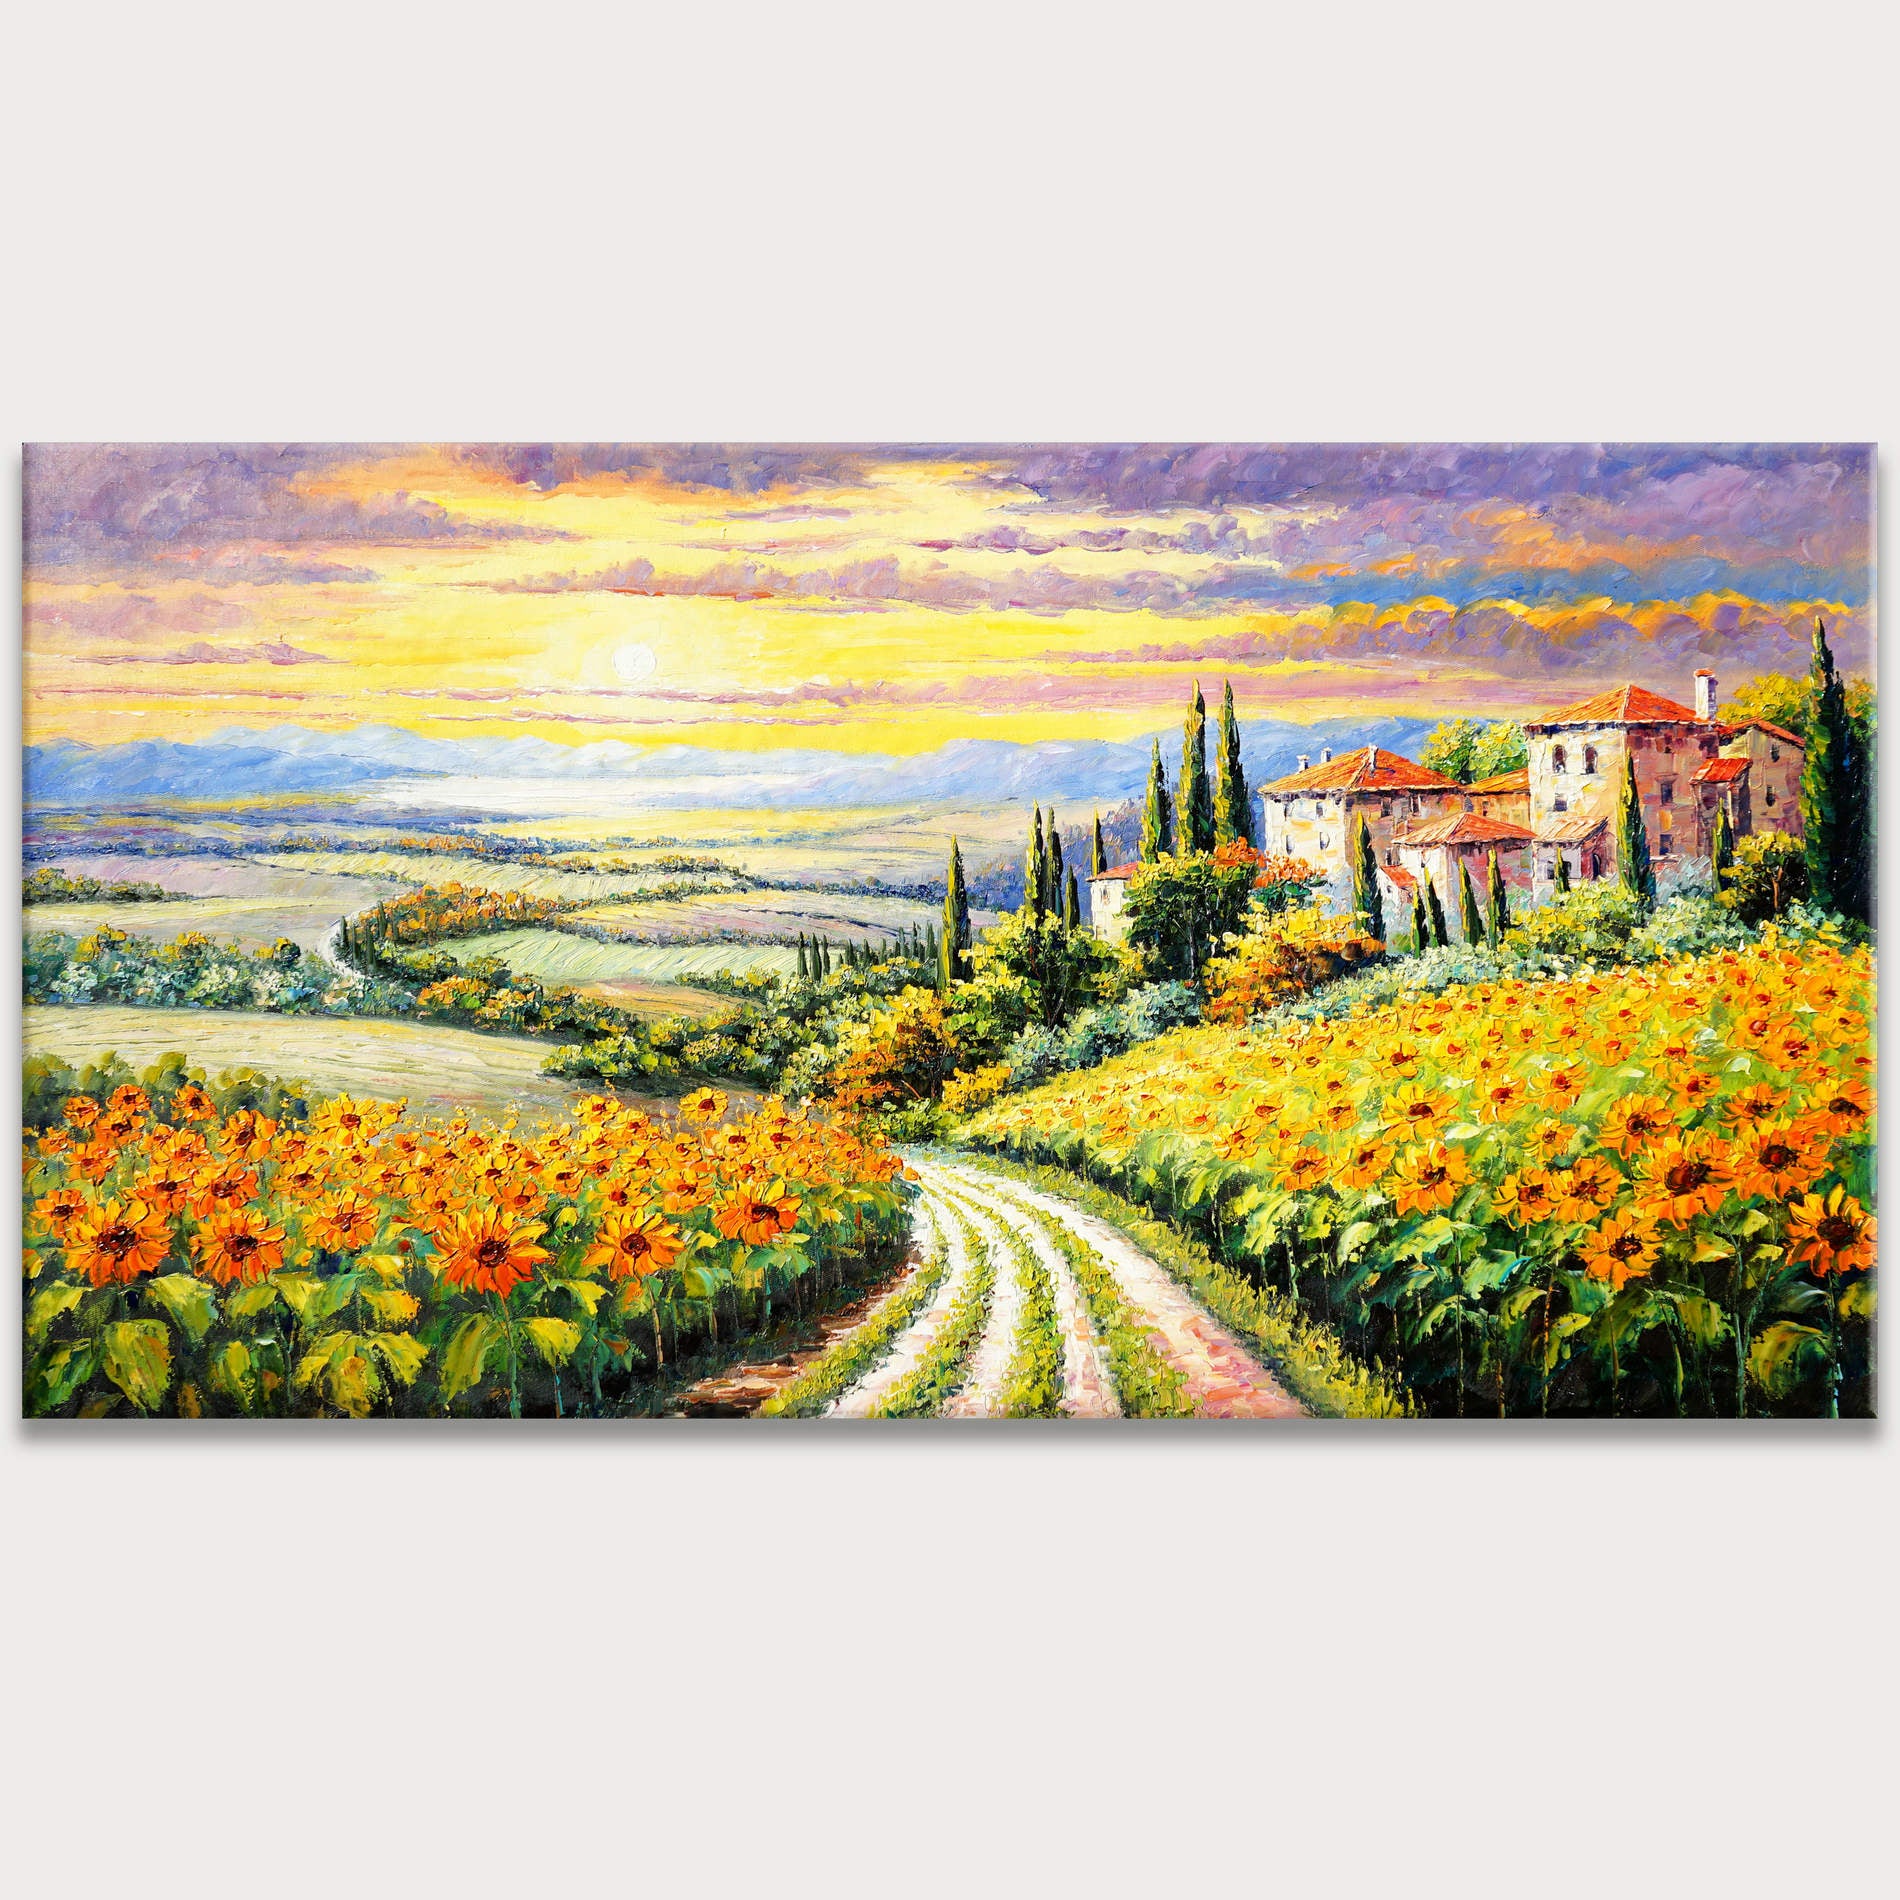 Hand painted Landscape with Sunflowers 60x120cm